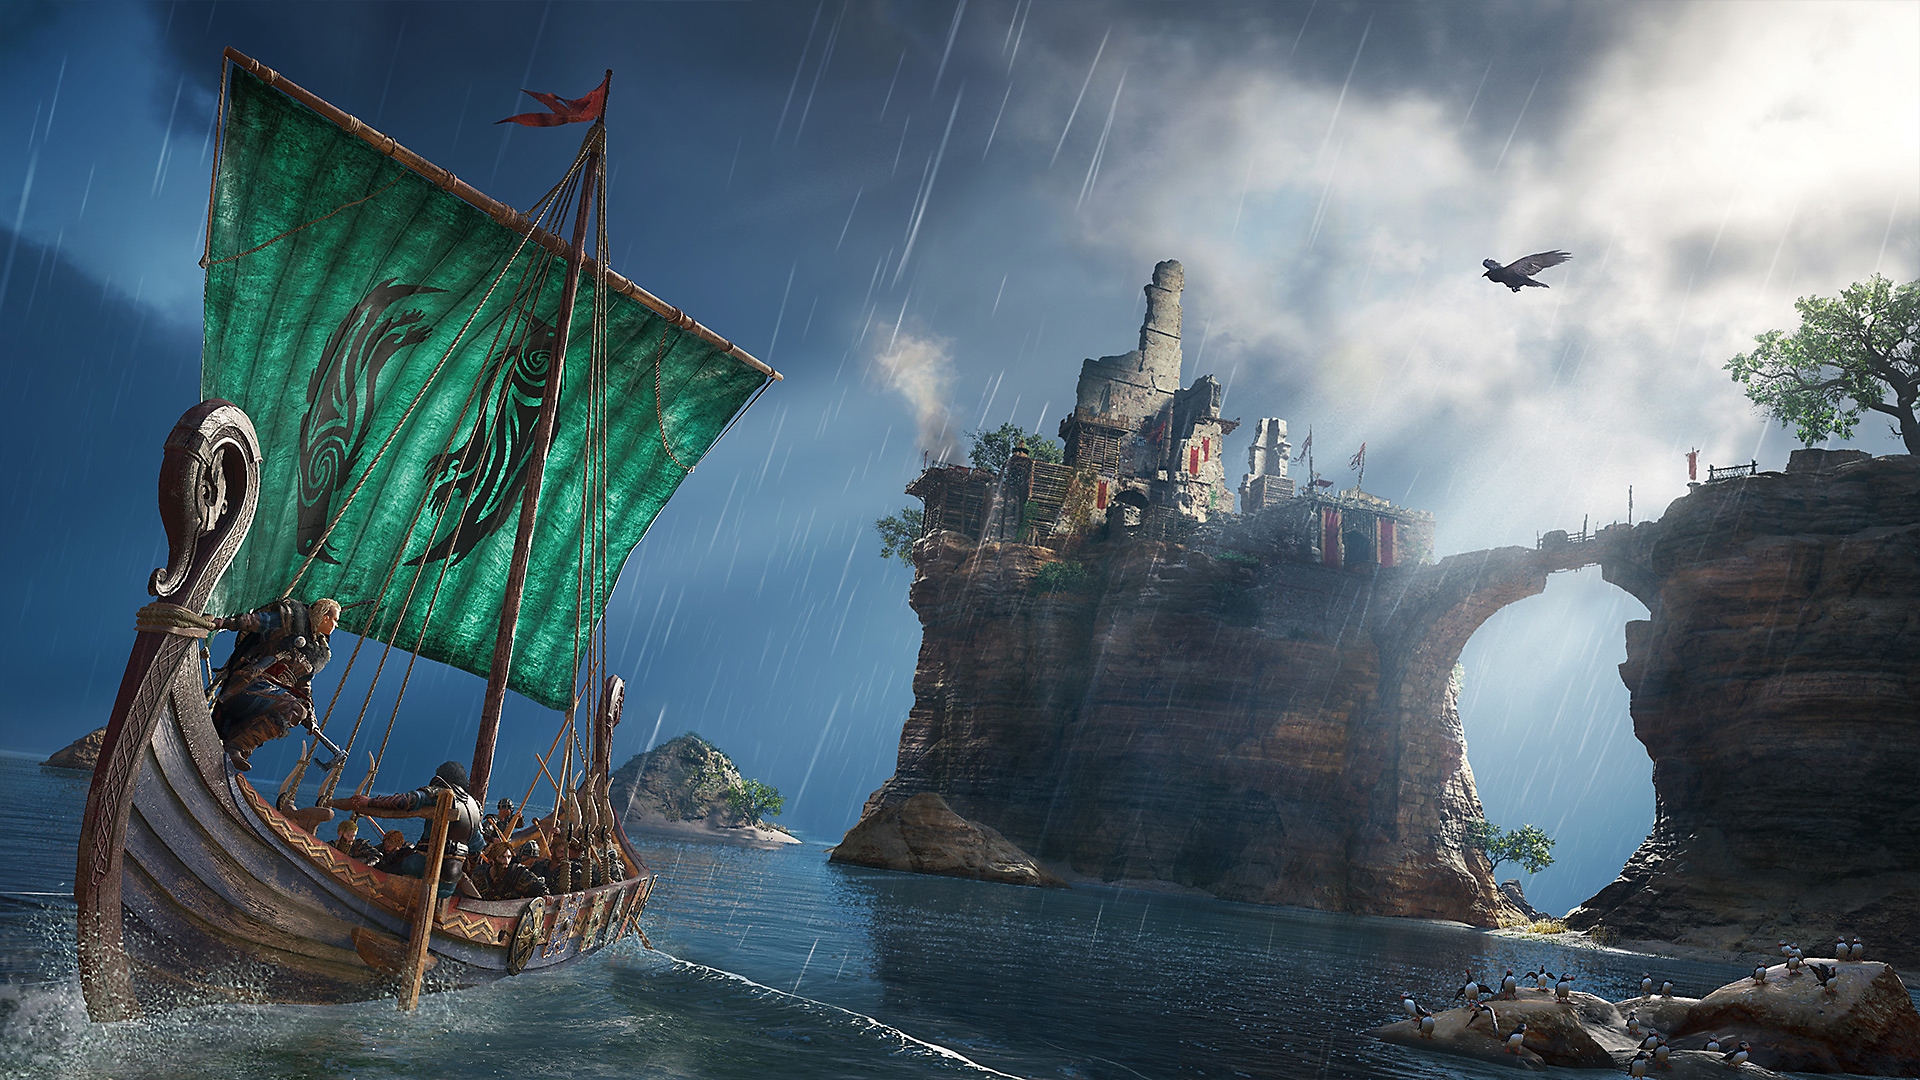 Assassin's Creed Valhalla screenshot showing character on Viking ship looking up at a building on a raised island